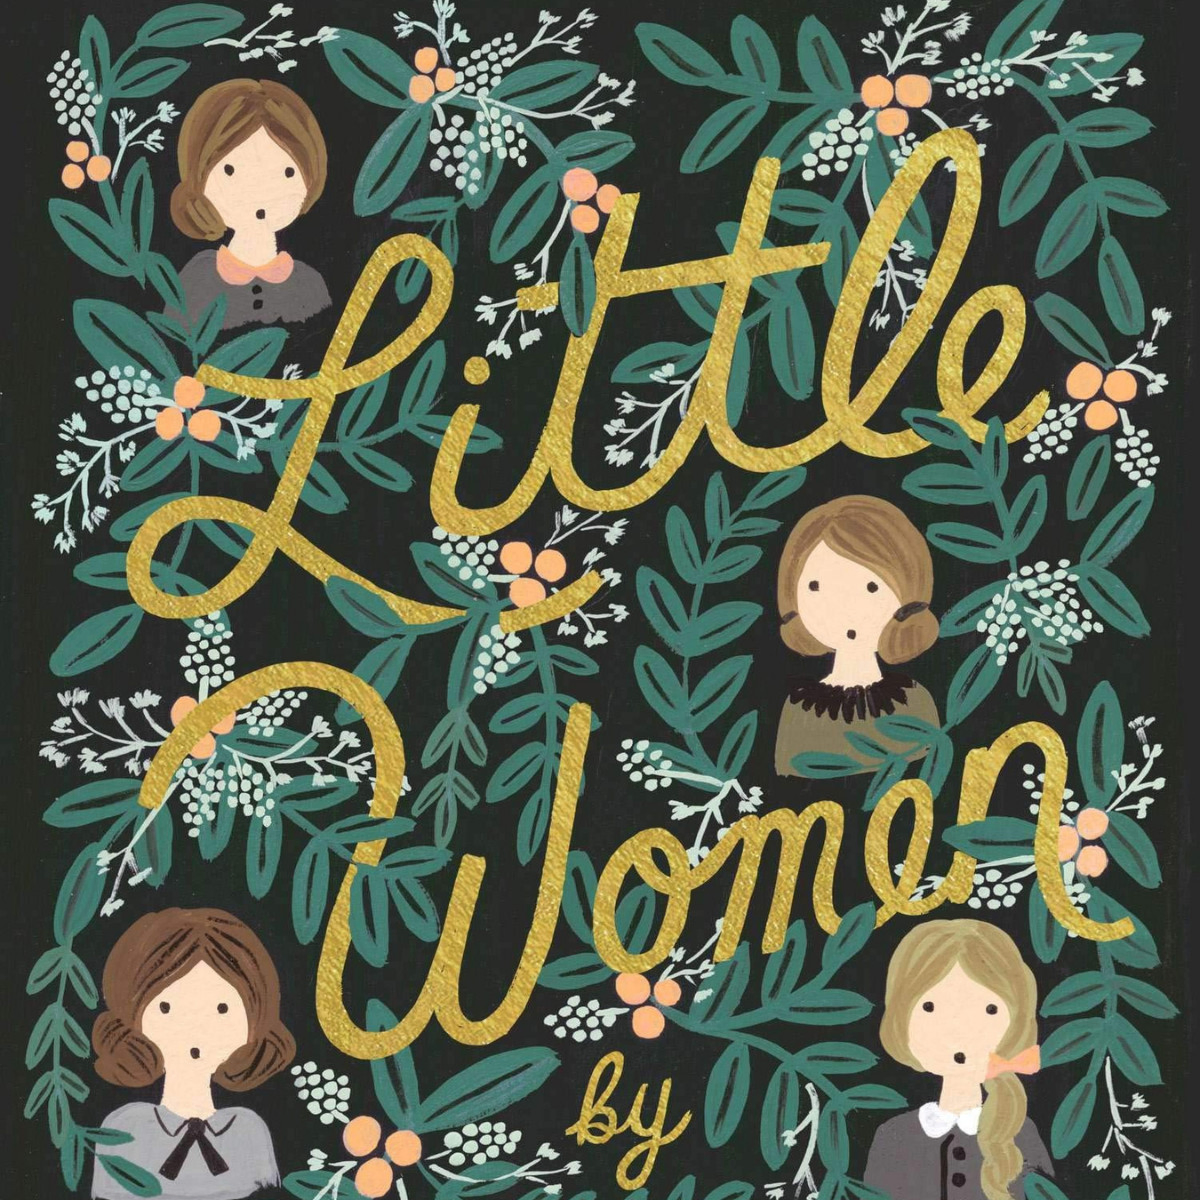 Epic Little Women Gift Guide: 27+ Gifts on Amazon & Etsy 2022